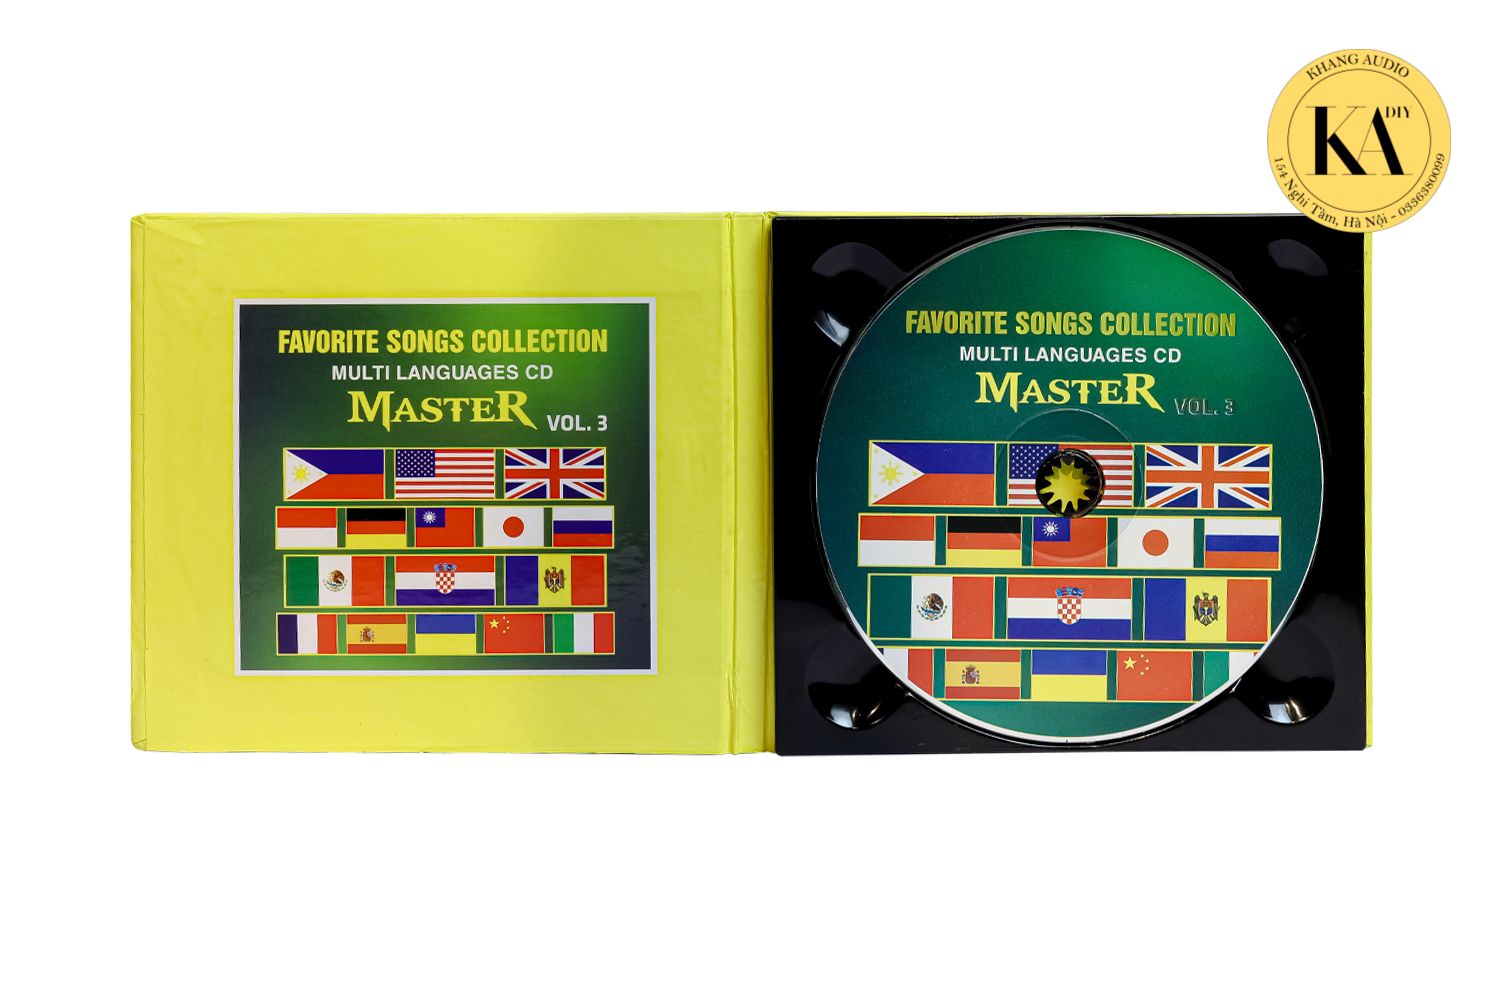 CD Master Favorite Songs Collection Vol.3